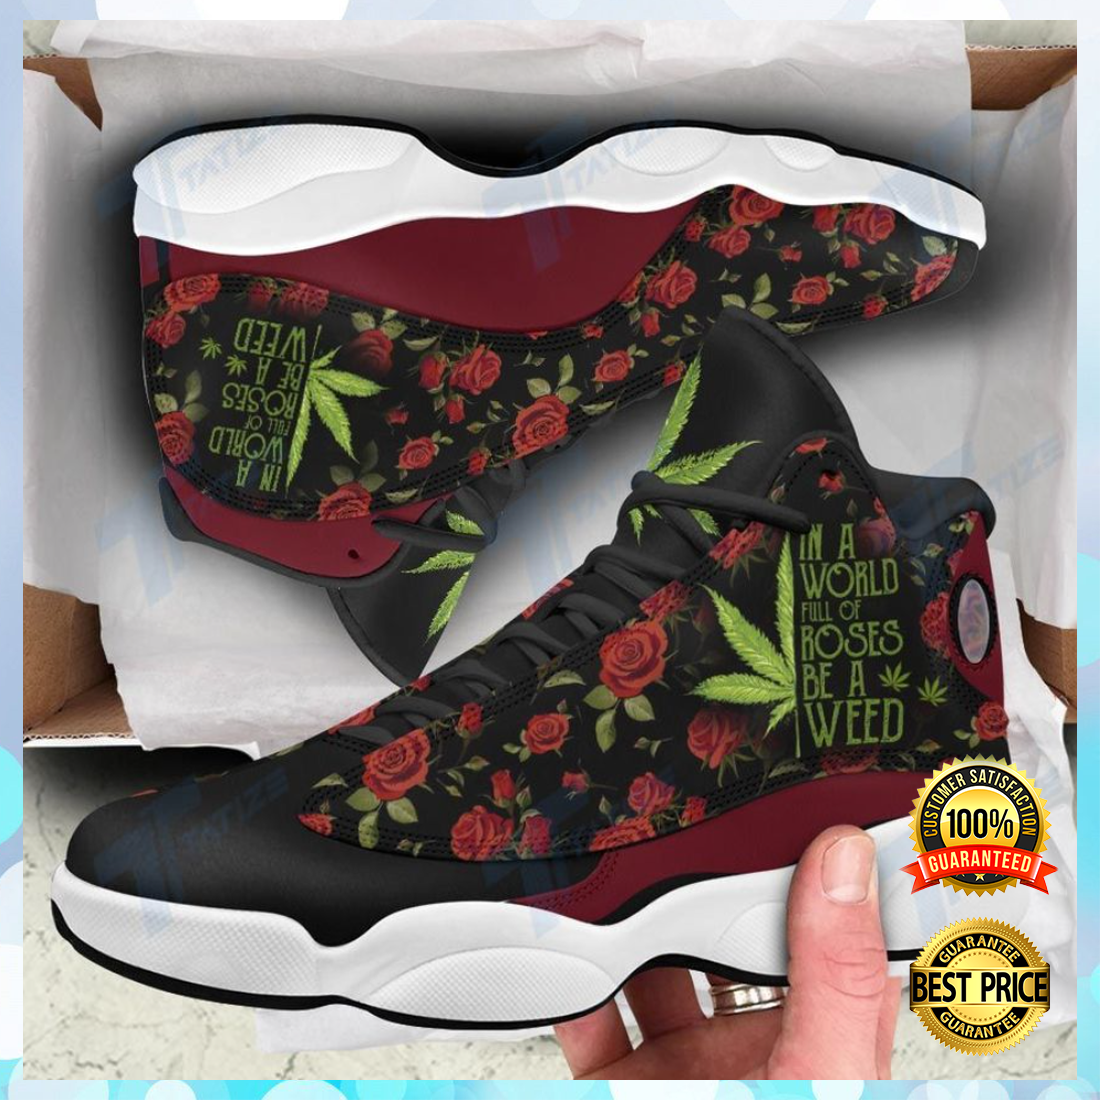 In a world full of roses be a weed Jordan 13 sneaker